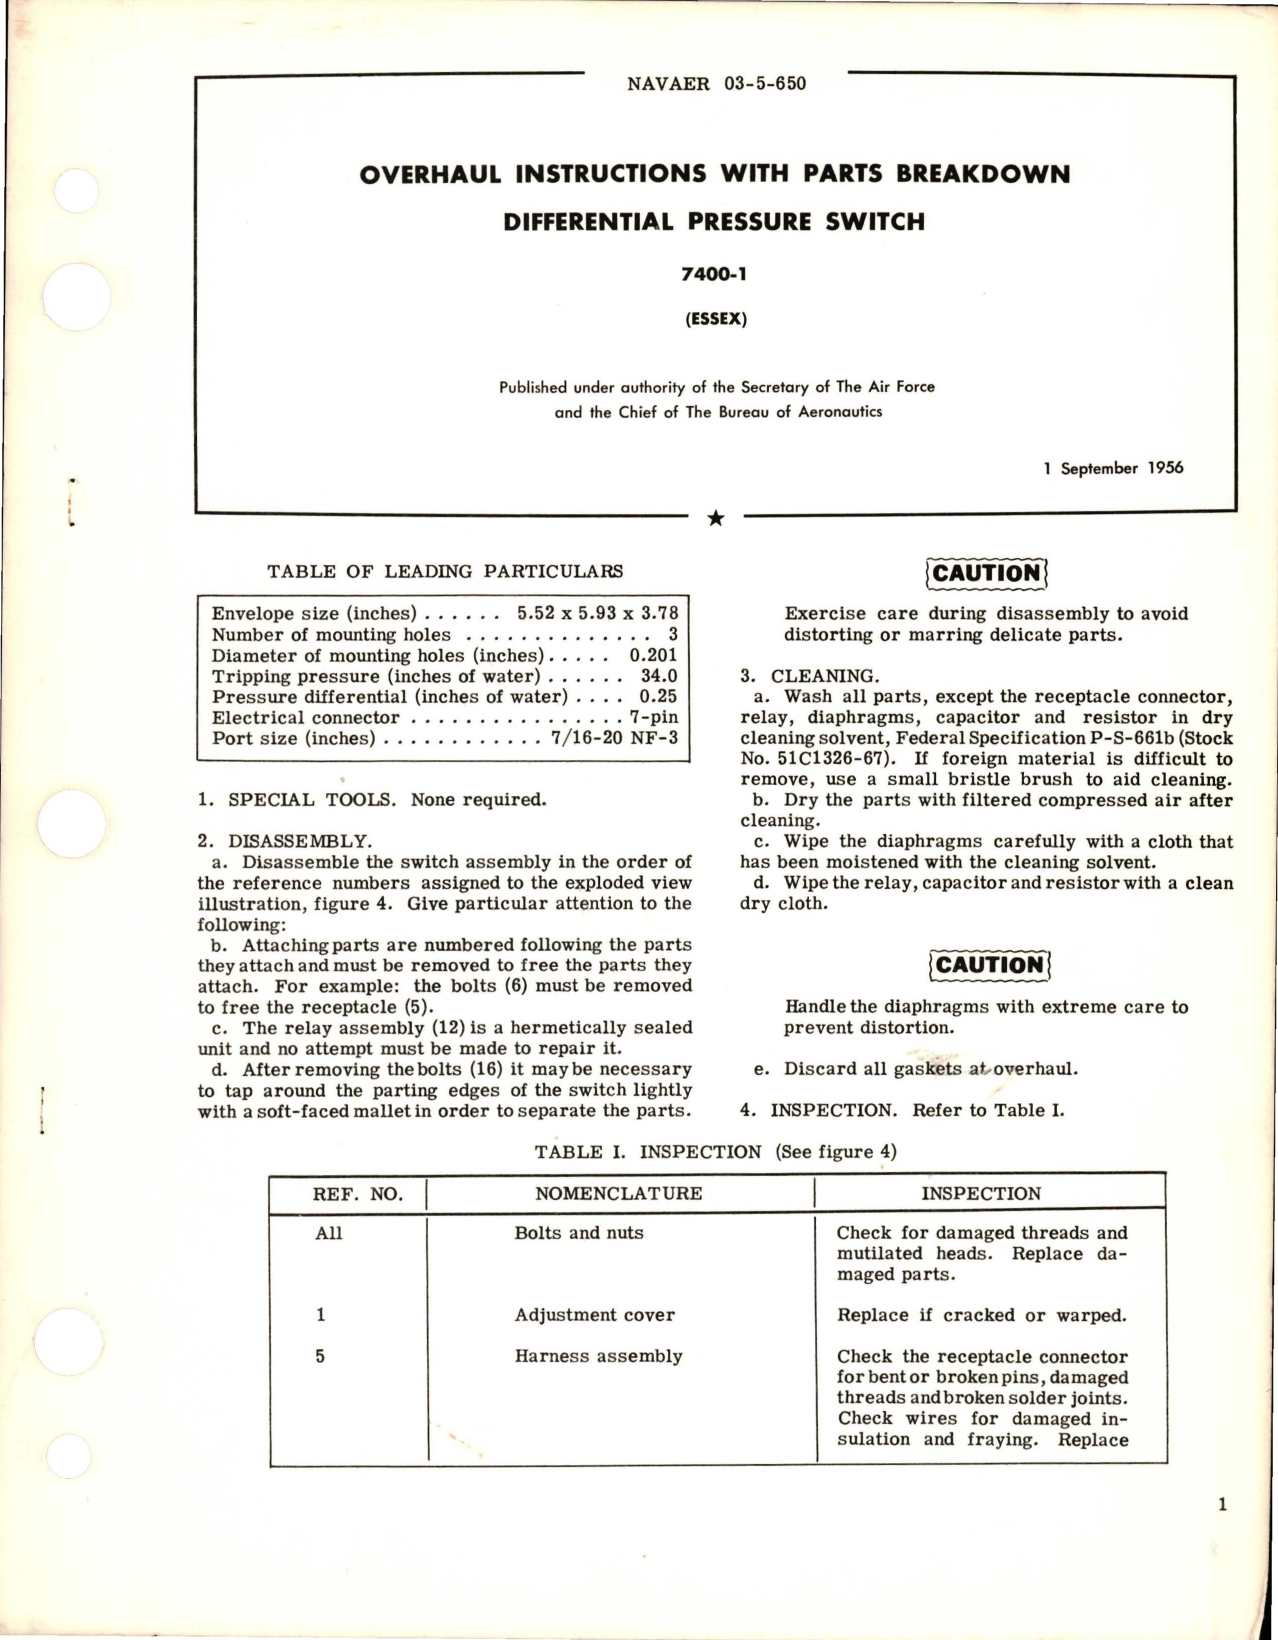 Sample page 1 from AirCorps Library document: Overhaul Instructions with Parts Breakdown for Differential Pressure Switch - 7400-1